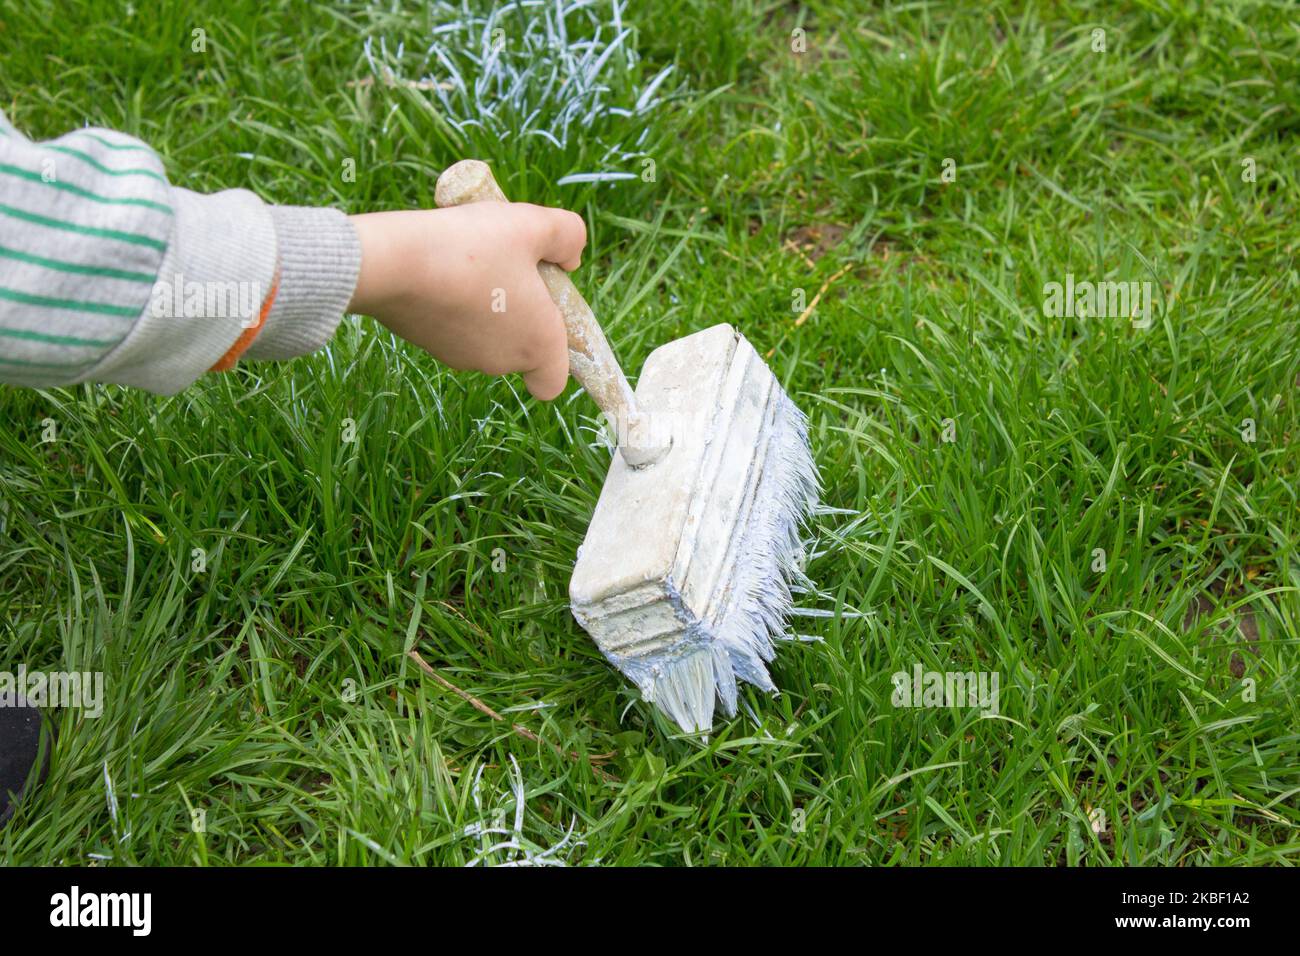 holding a brush over the grass and lime whitewash Stock Photo